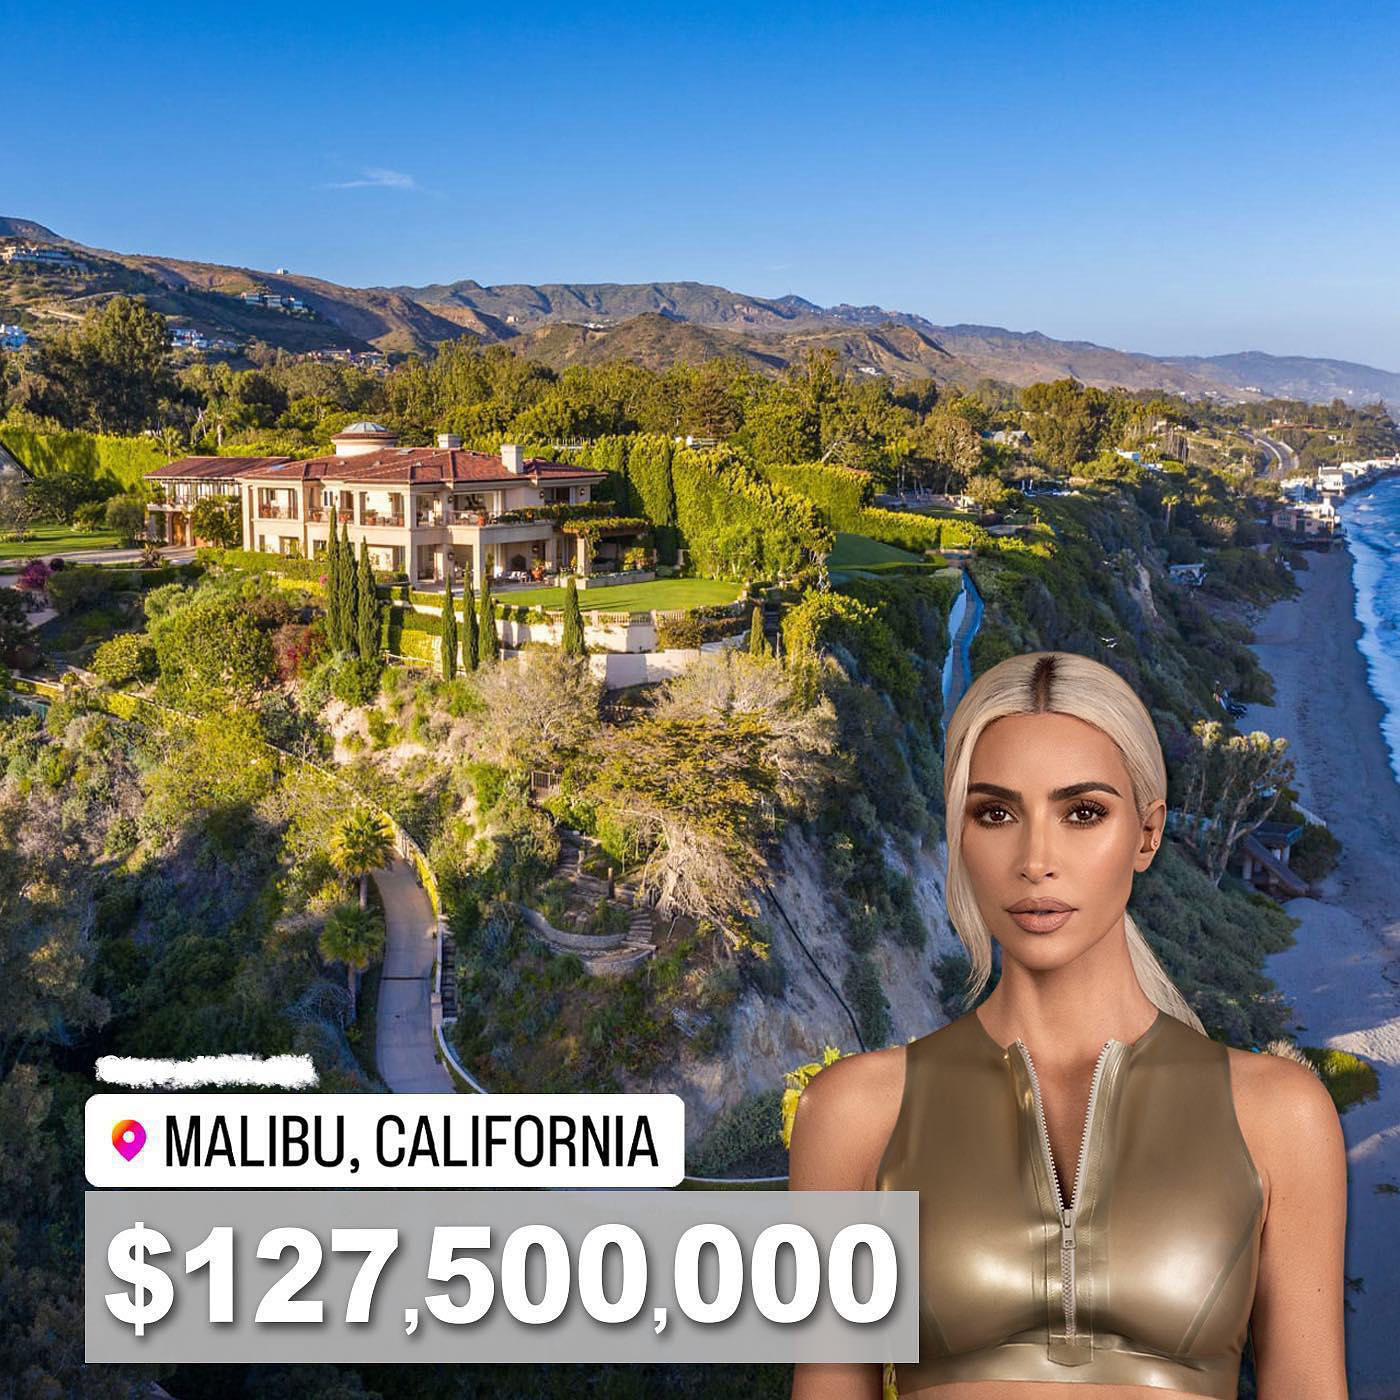 Luxury Real Estate - #kimkardashian reportedly just purchased this massive Malibu mansion, listed fo